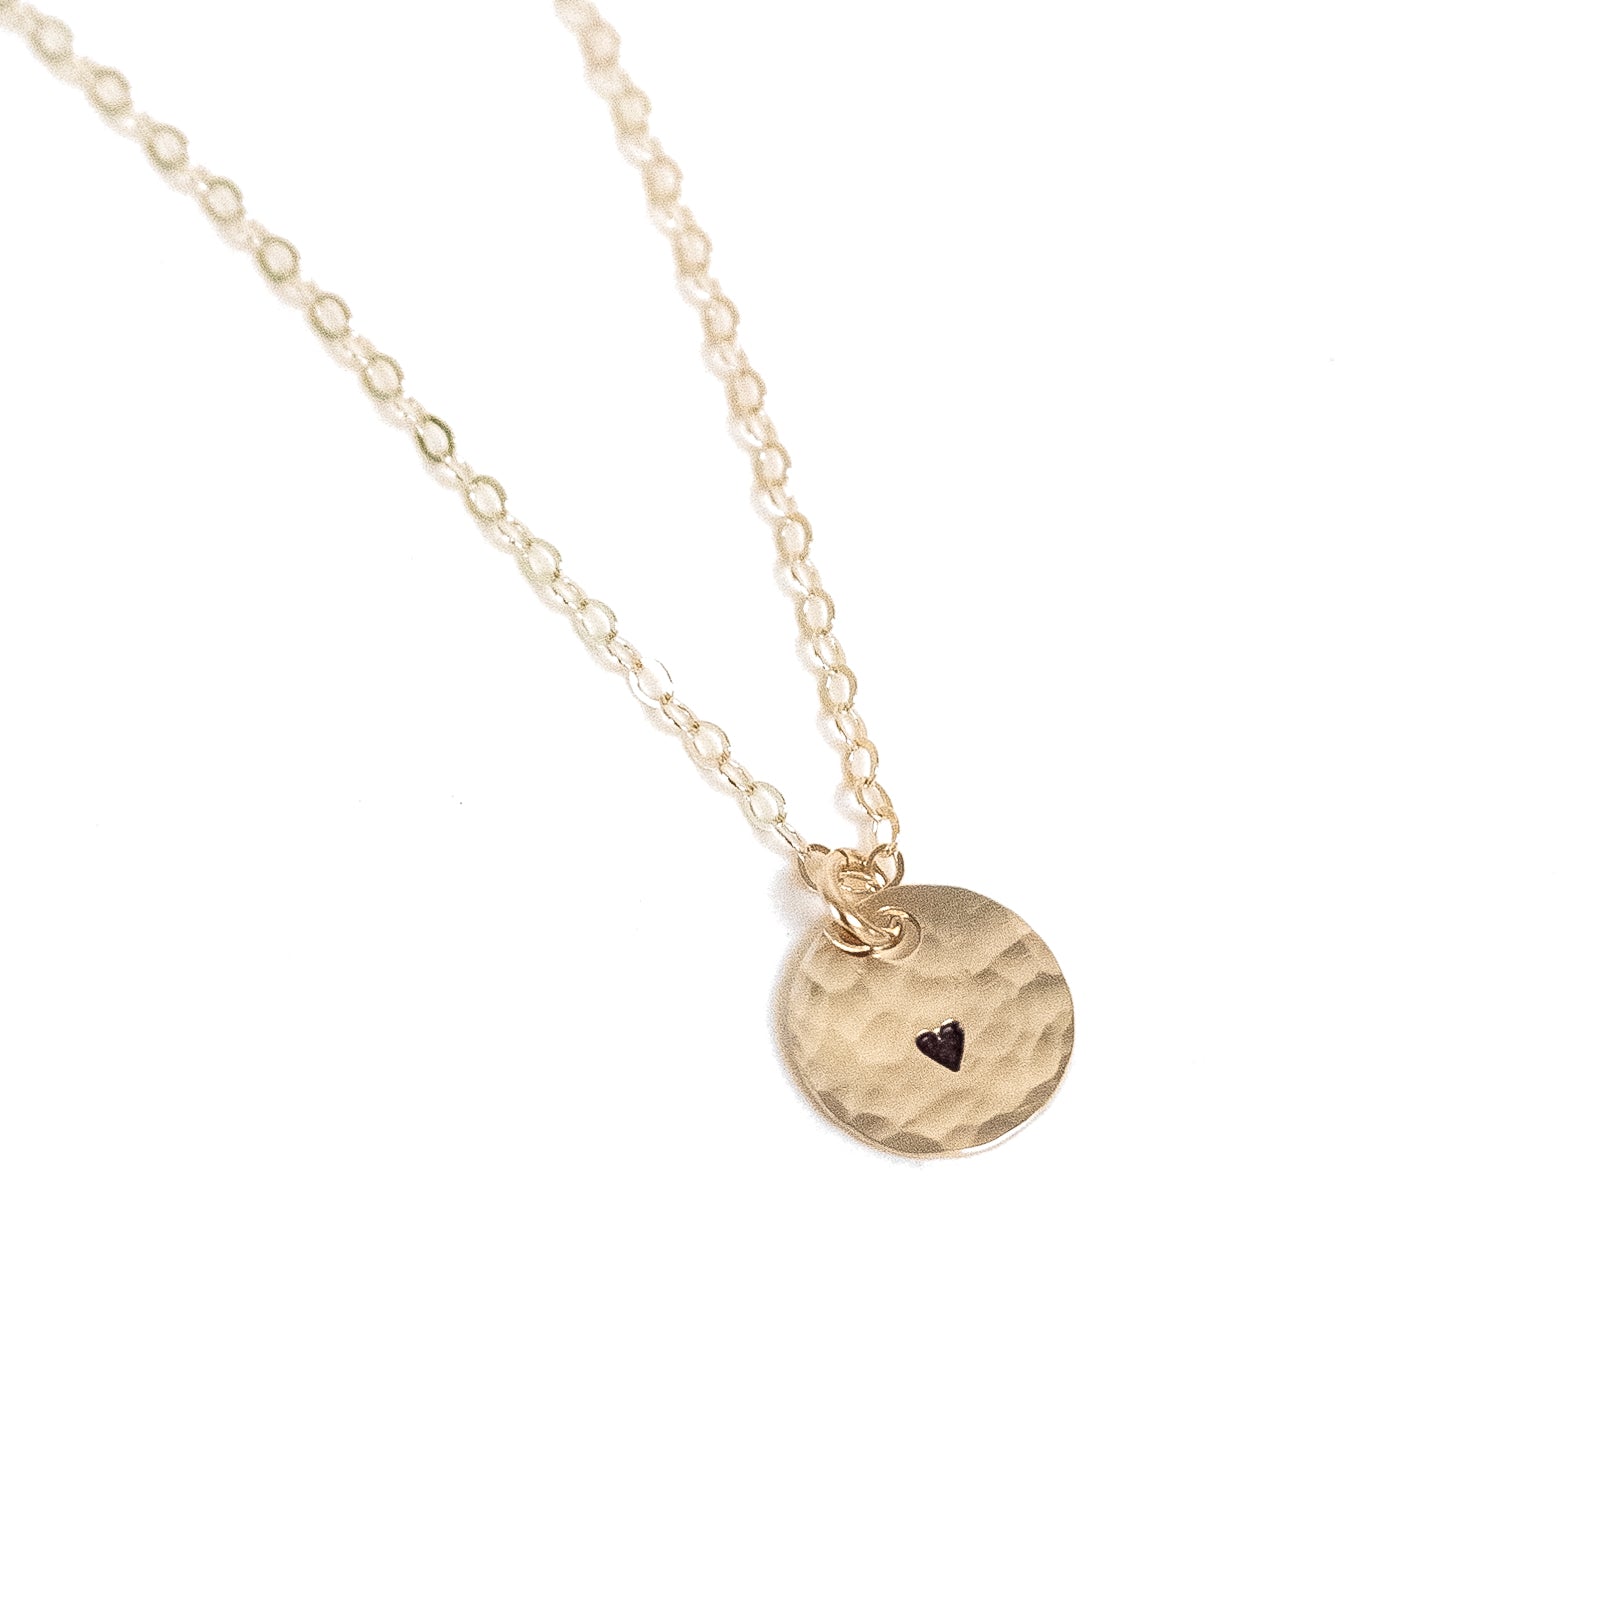 Hand-Stamped Tiny Single Initial Necklace